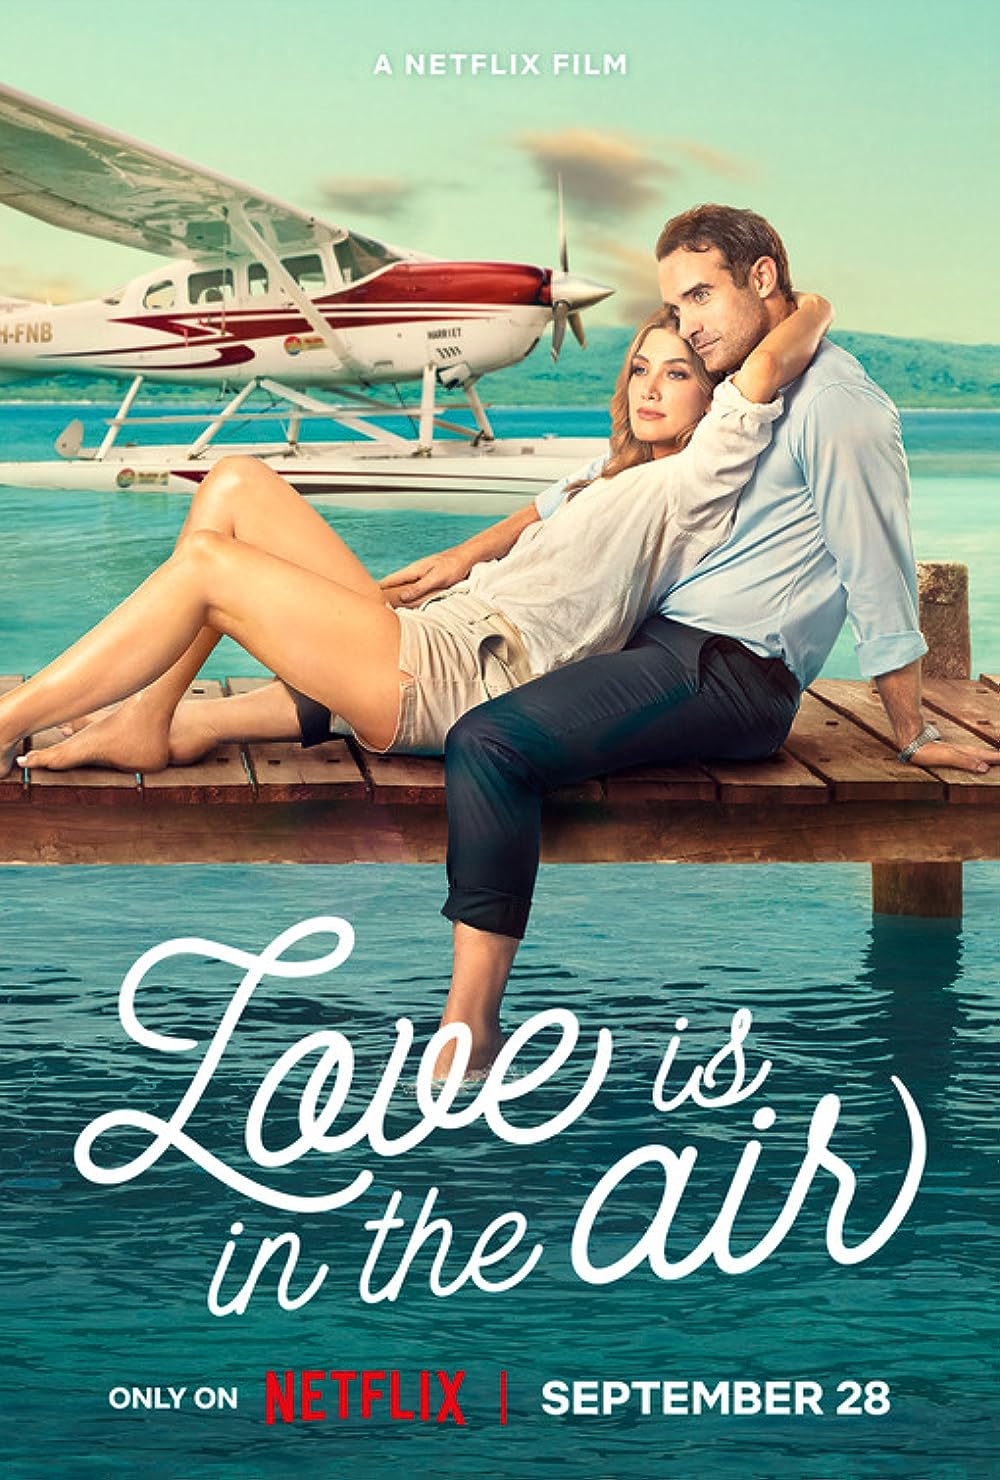 Love is in the Air - Netflix (September 28)Love is in the Air takes flight on Netflix, delivering a heartwarming and captivating story set in the enchanting Far North Queensland. The series follows Dana Randall, a dedicated pilot committed to the nonprofit air service, Fullerton Airways. Working alongside her father, Jeff, and her loyal mechanic and best friend, Nikki, they form a tight-knit team dedicated to providing vital air services to remote island communities.